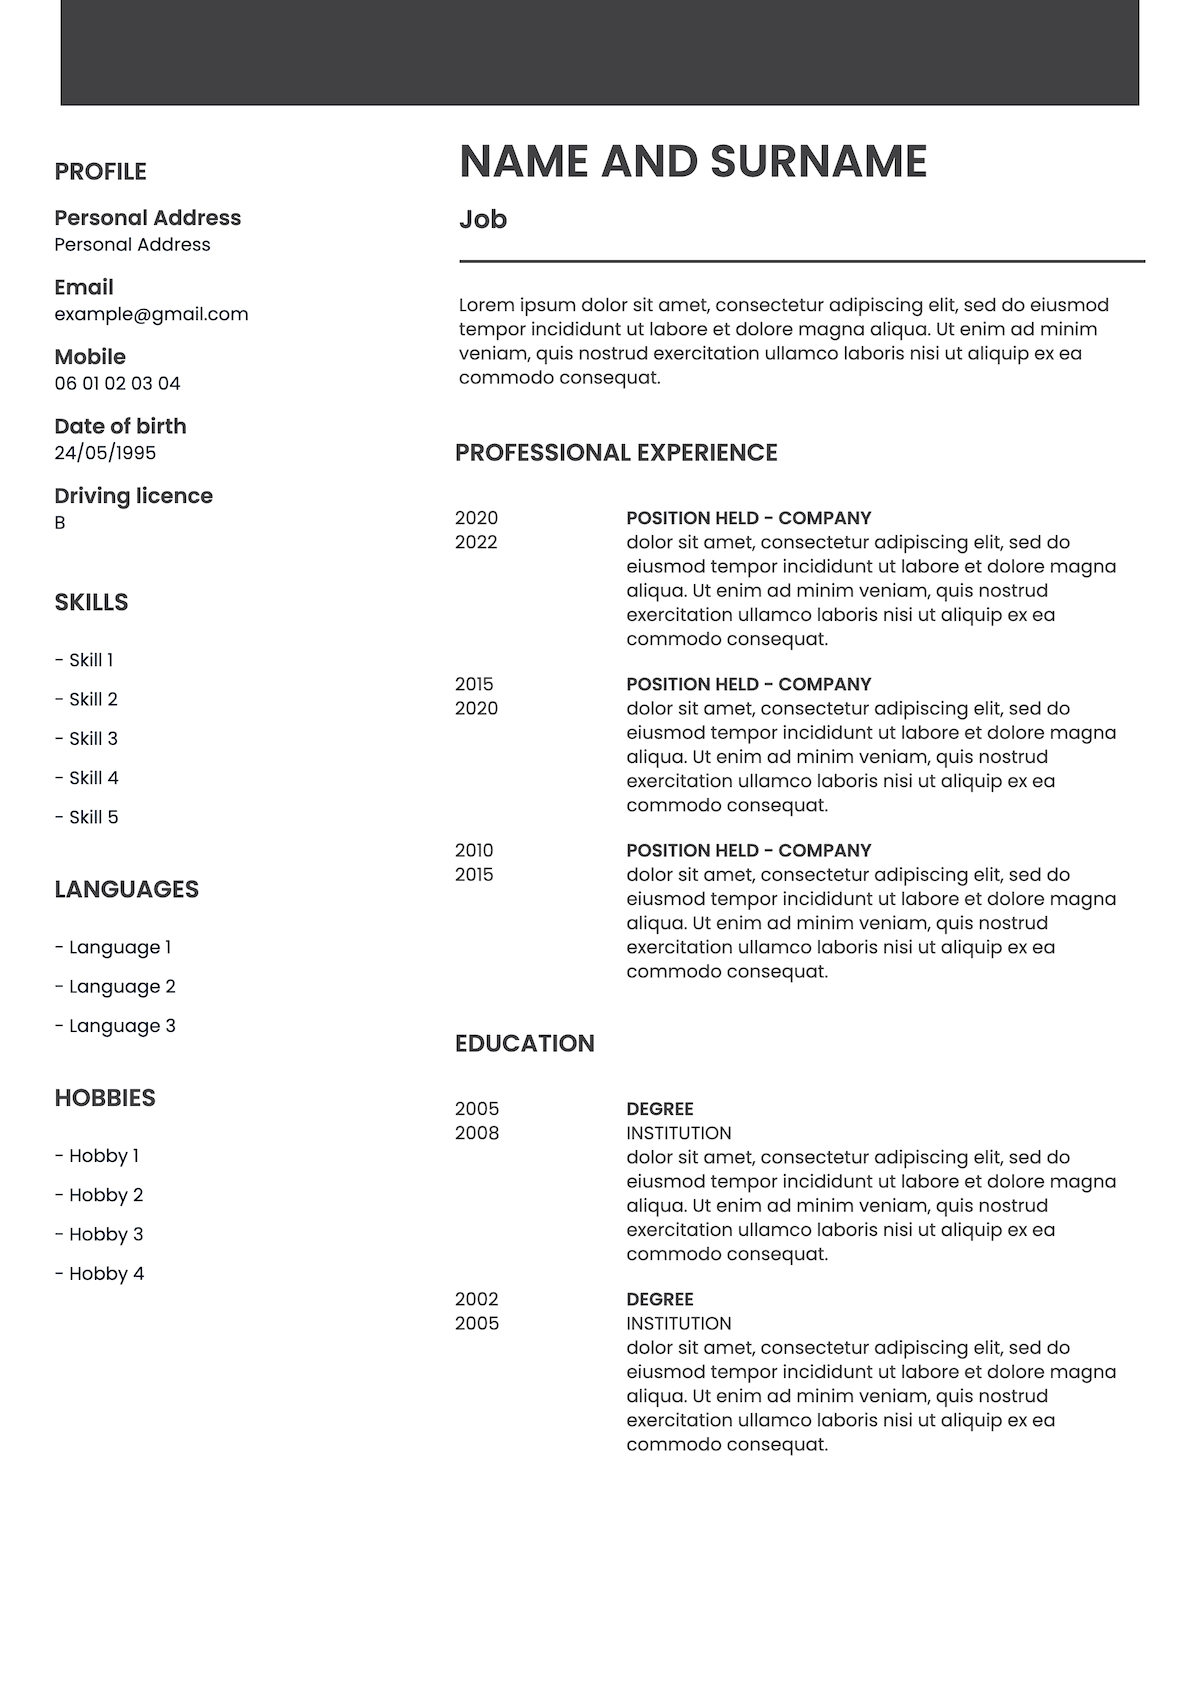 original CV without picture